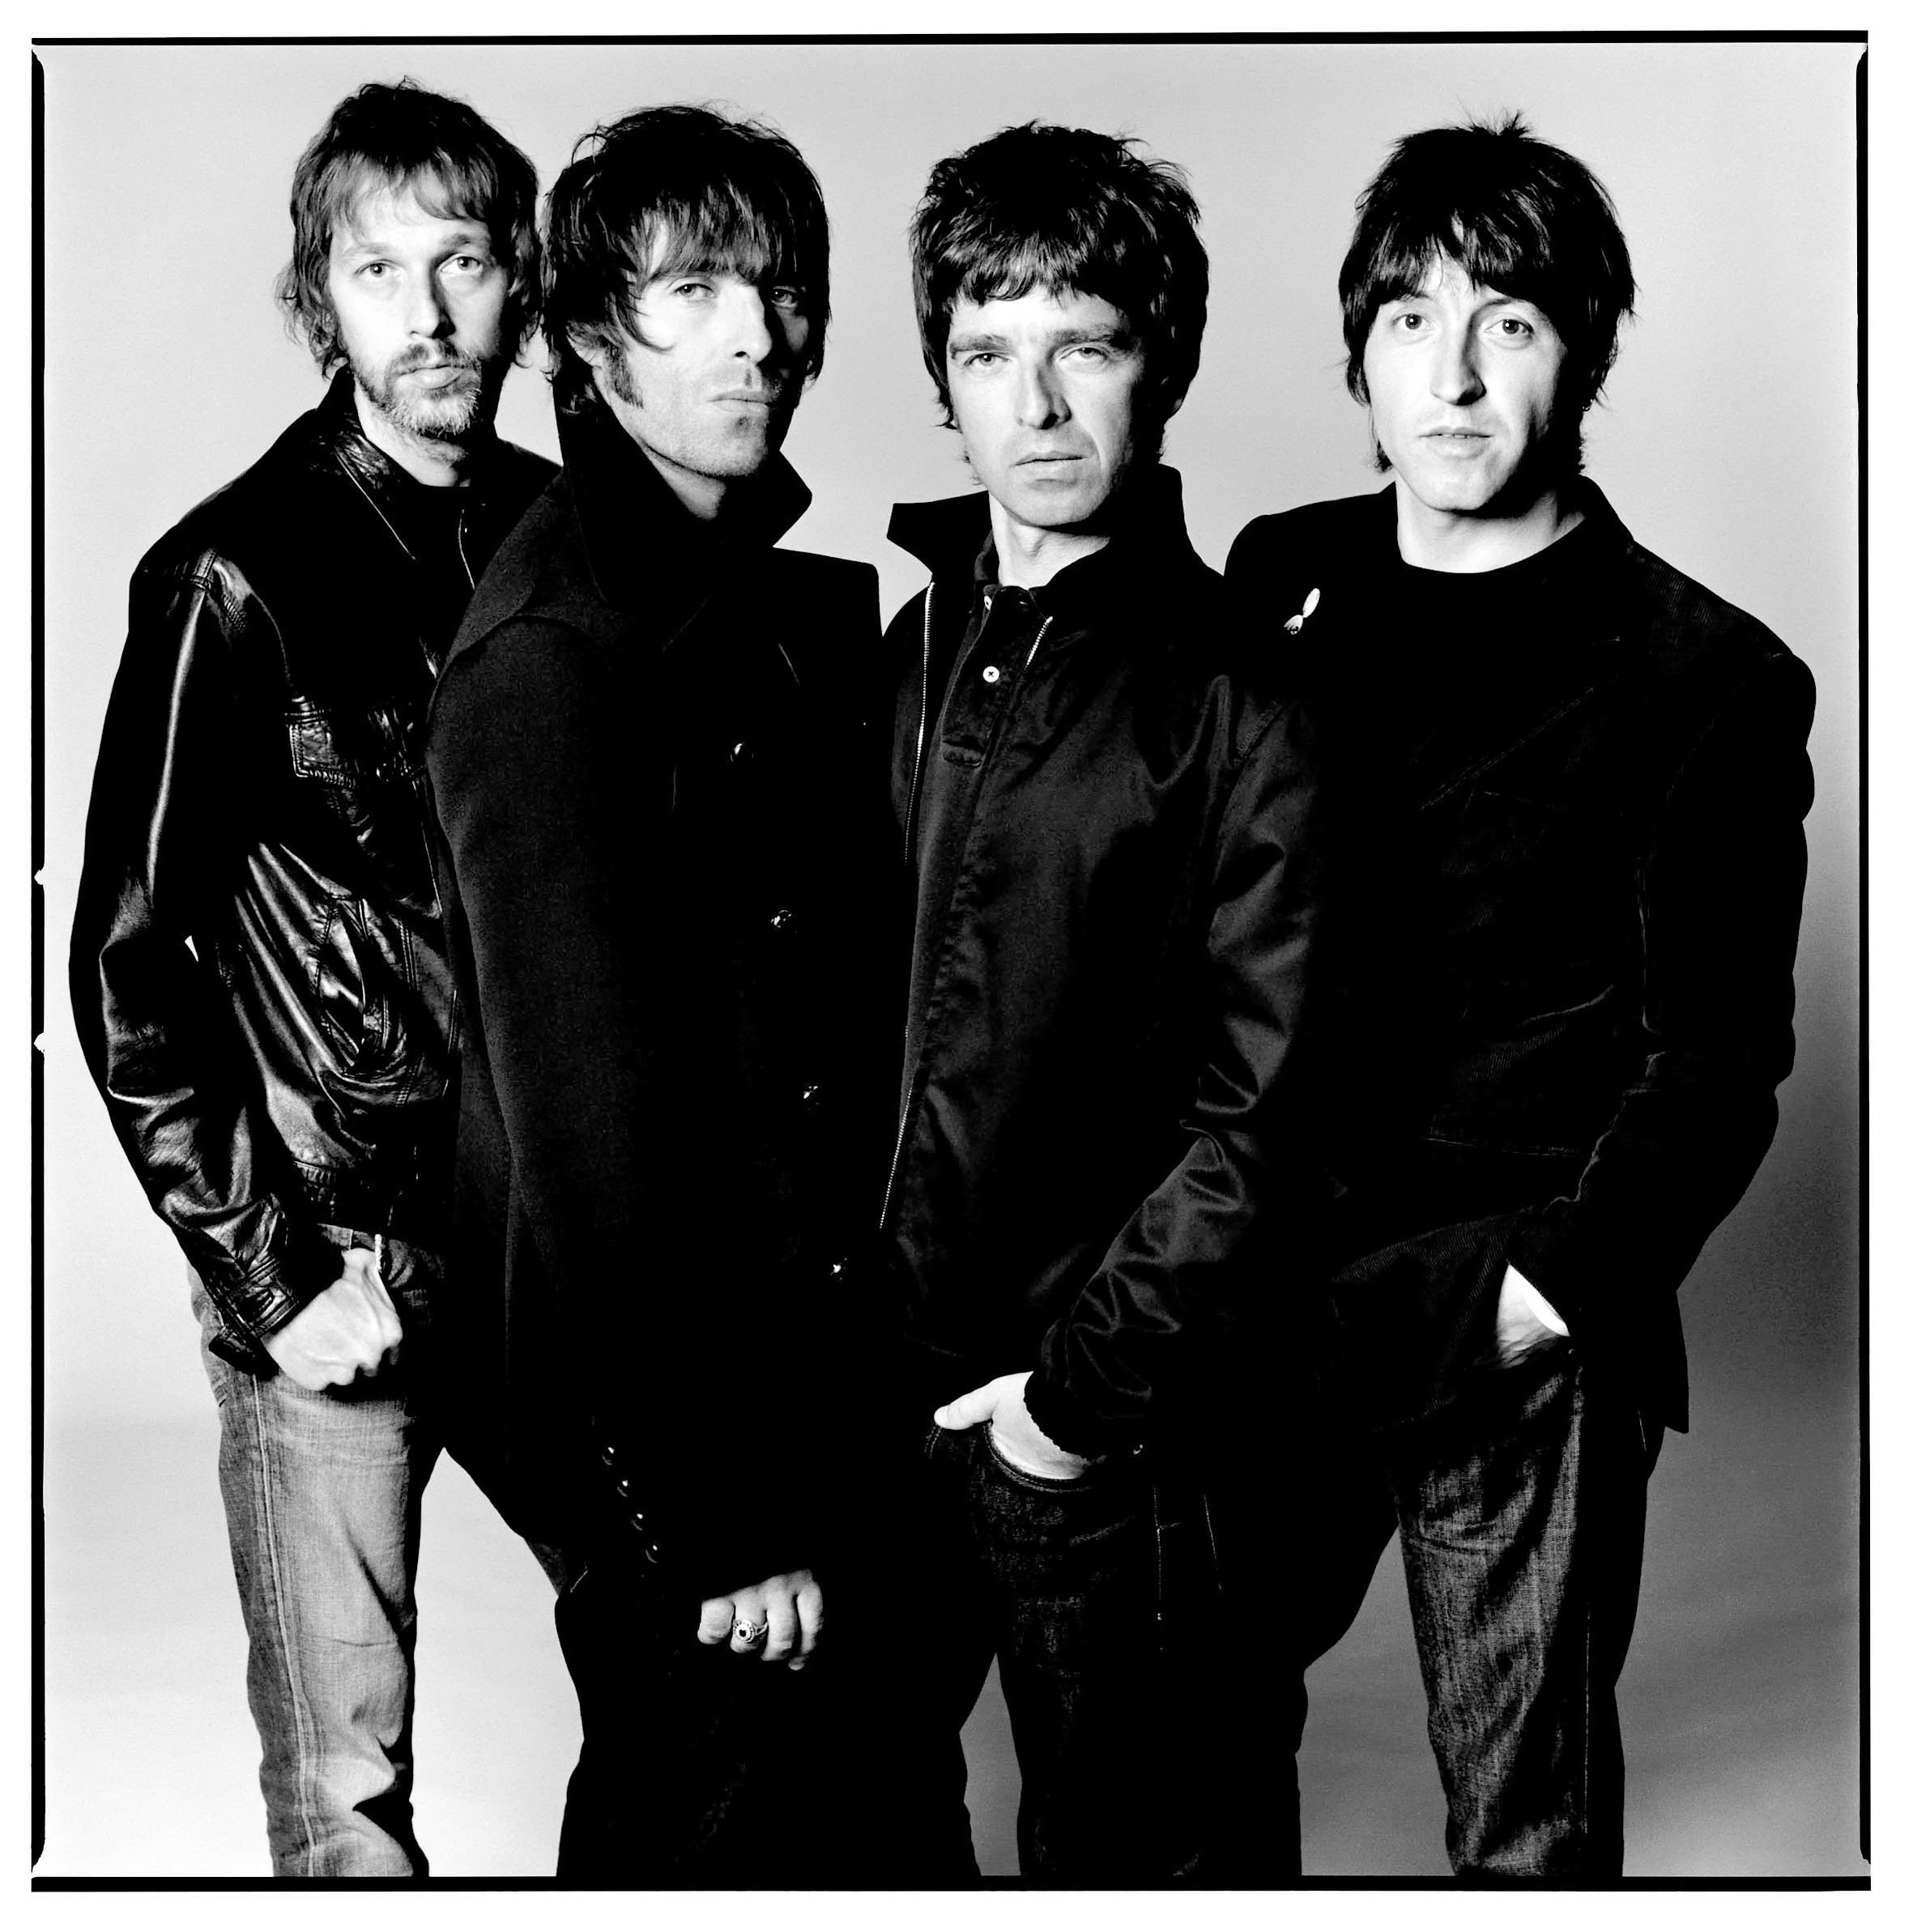 Big Brother Recordings to Release 25th Anniversary Re-Issue of Oasis' 'Be Here Now'